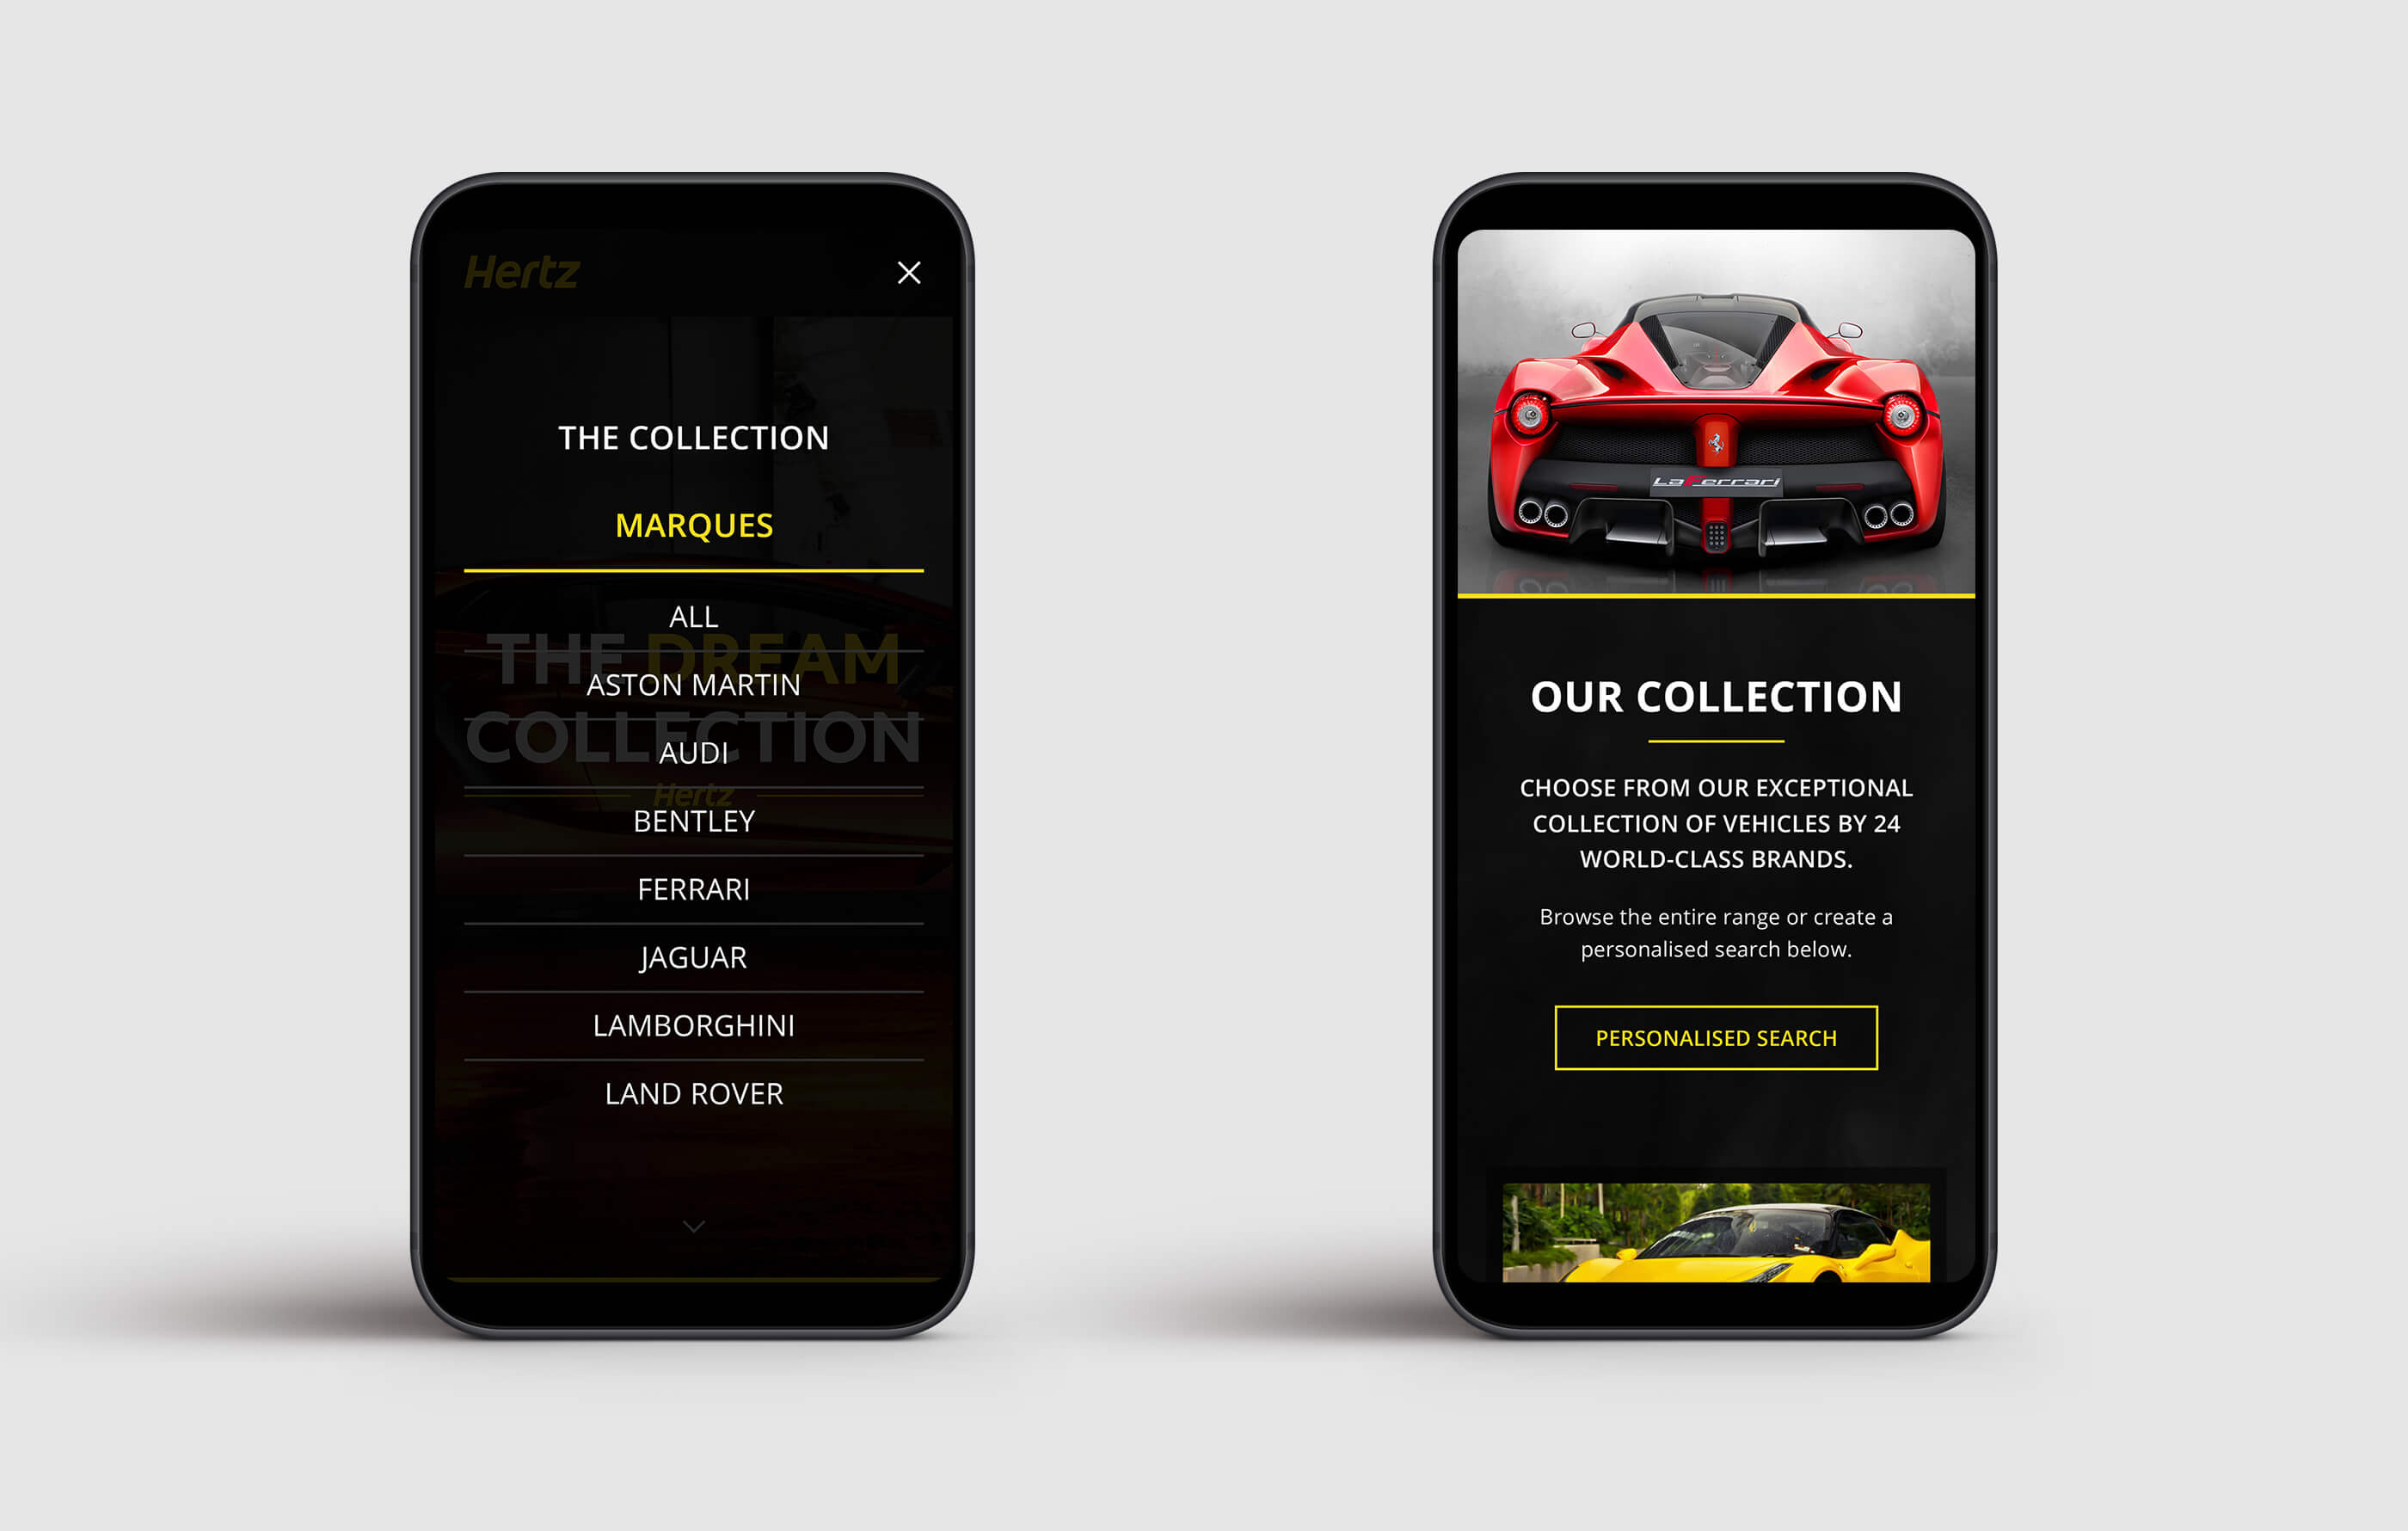 Two mobile phone mockups of the mobile navigation and collection page designs, featuring a rear picture of a red Ferrari La Ferrari